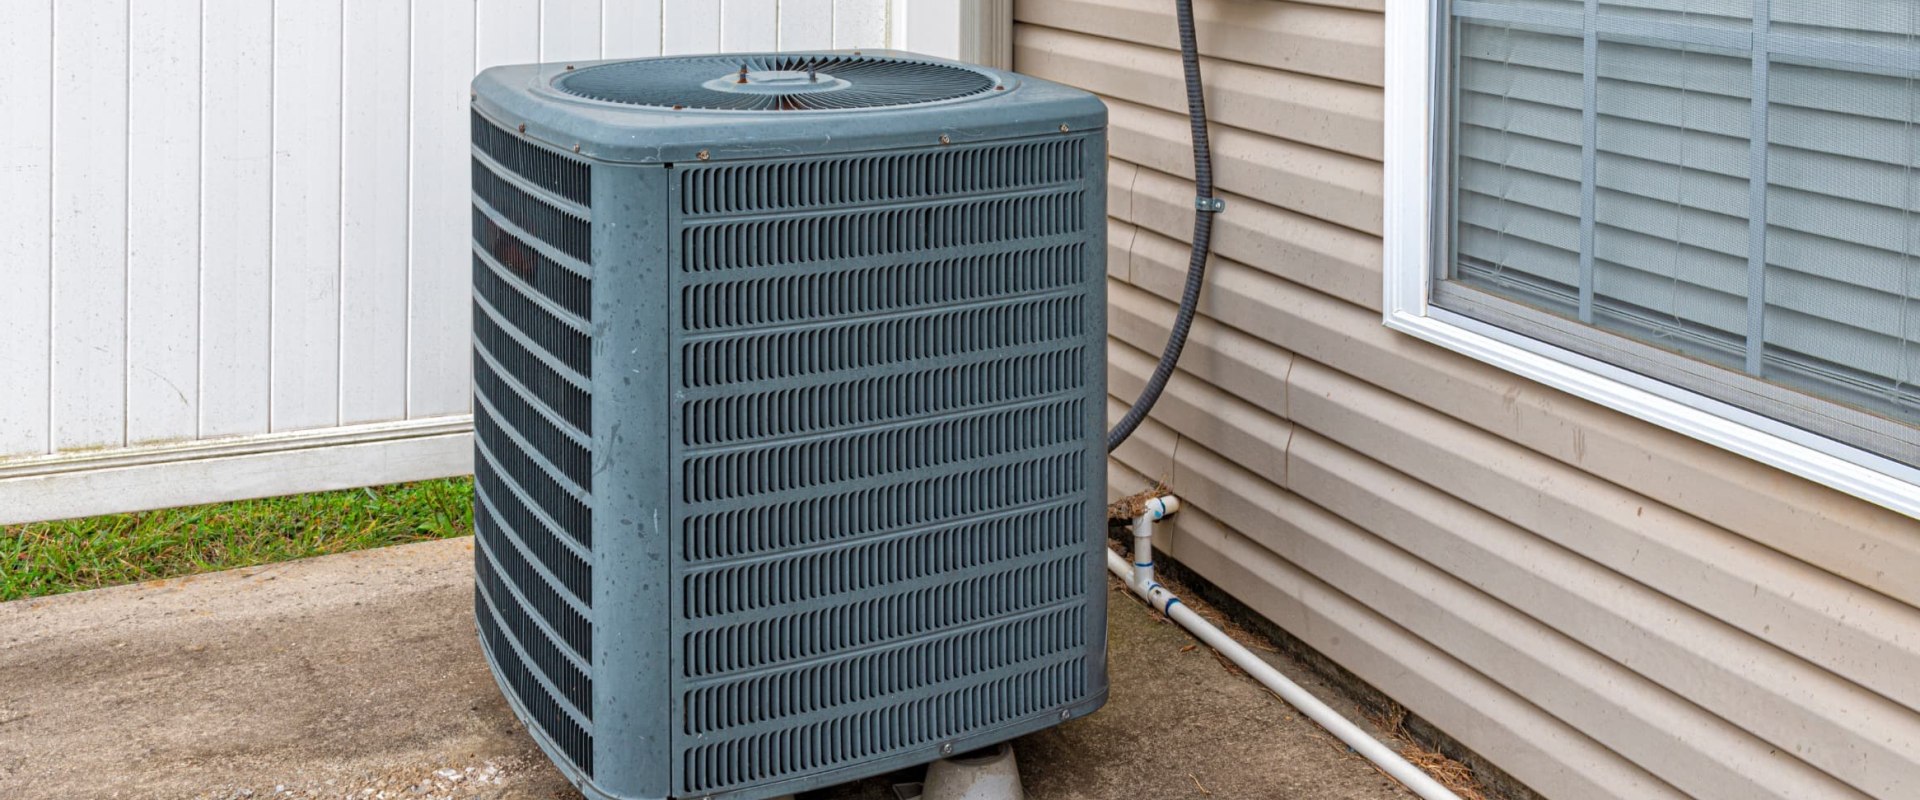 Common HVAC System Issues in Miami Beach, FL and How to Avoid Them